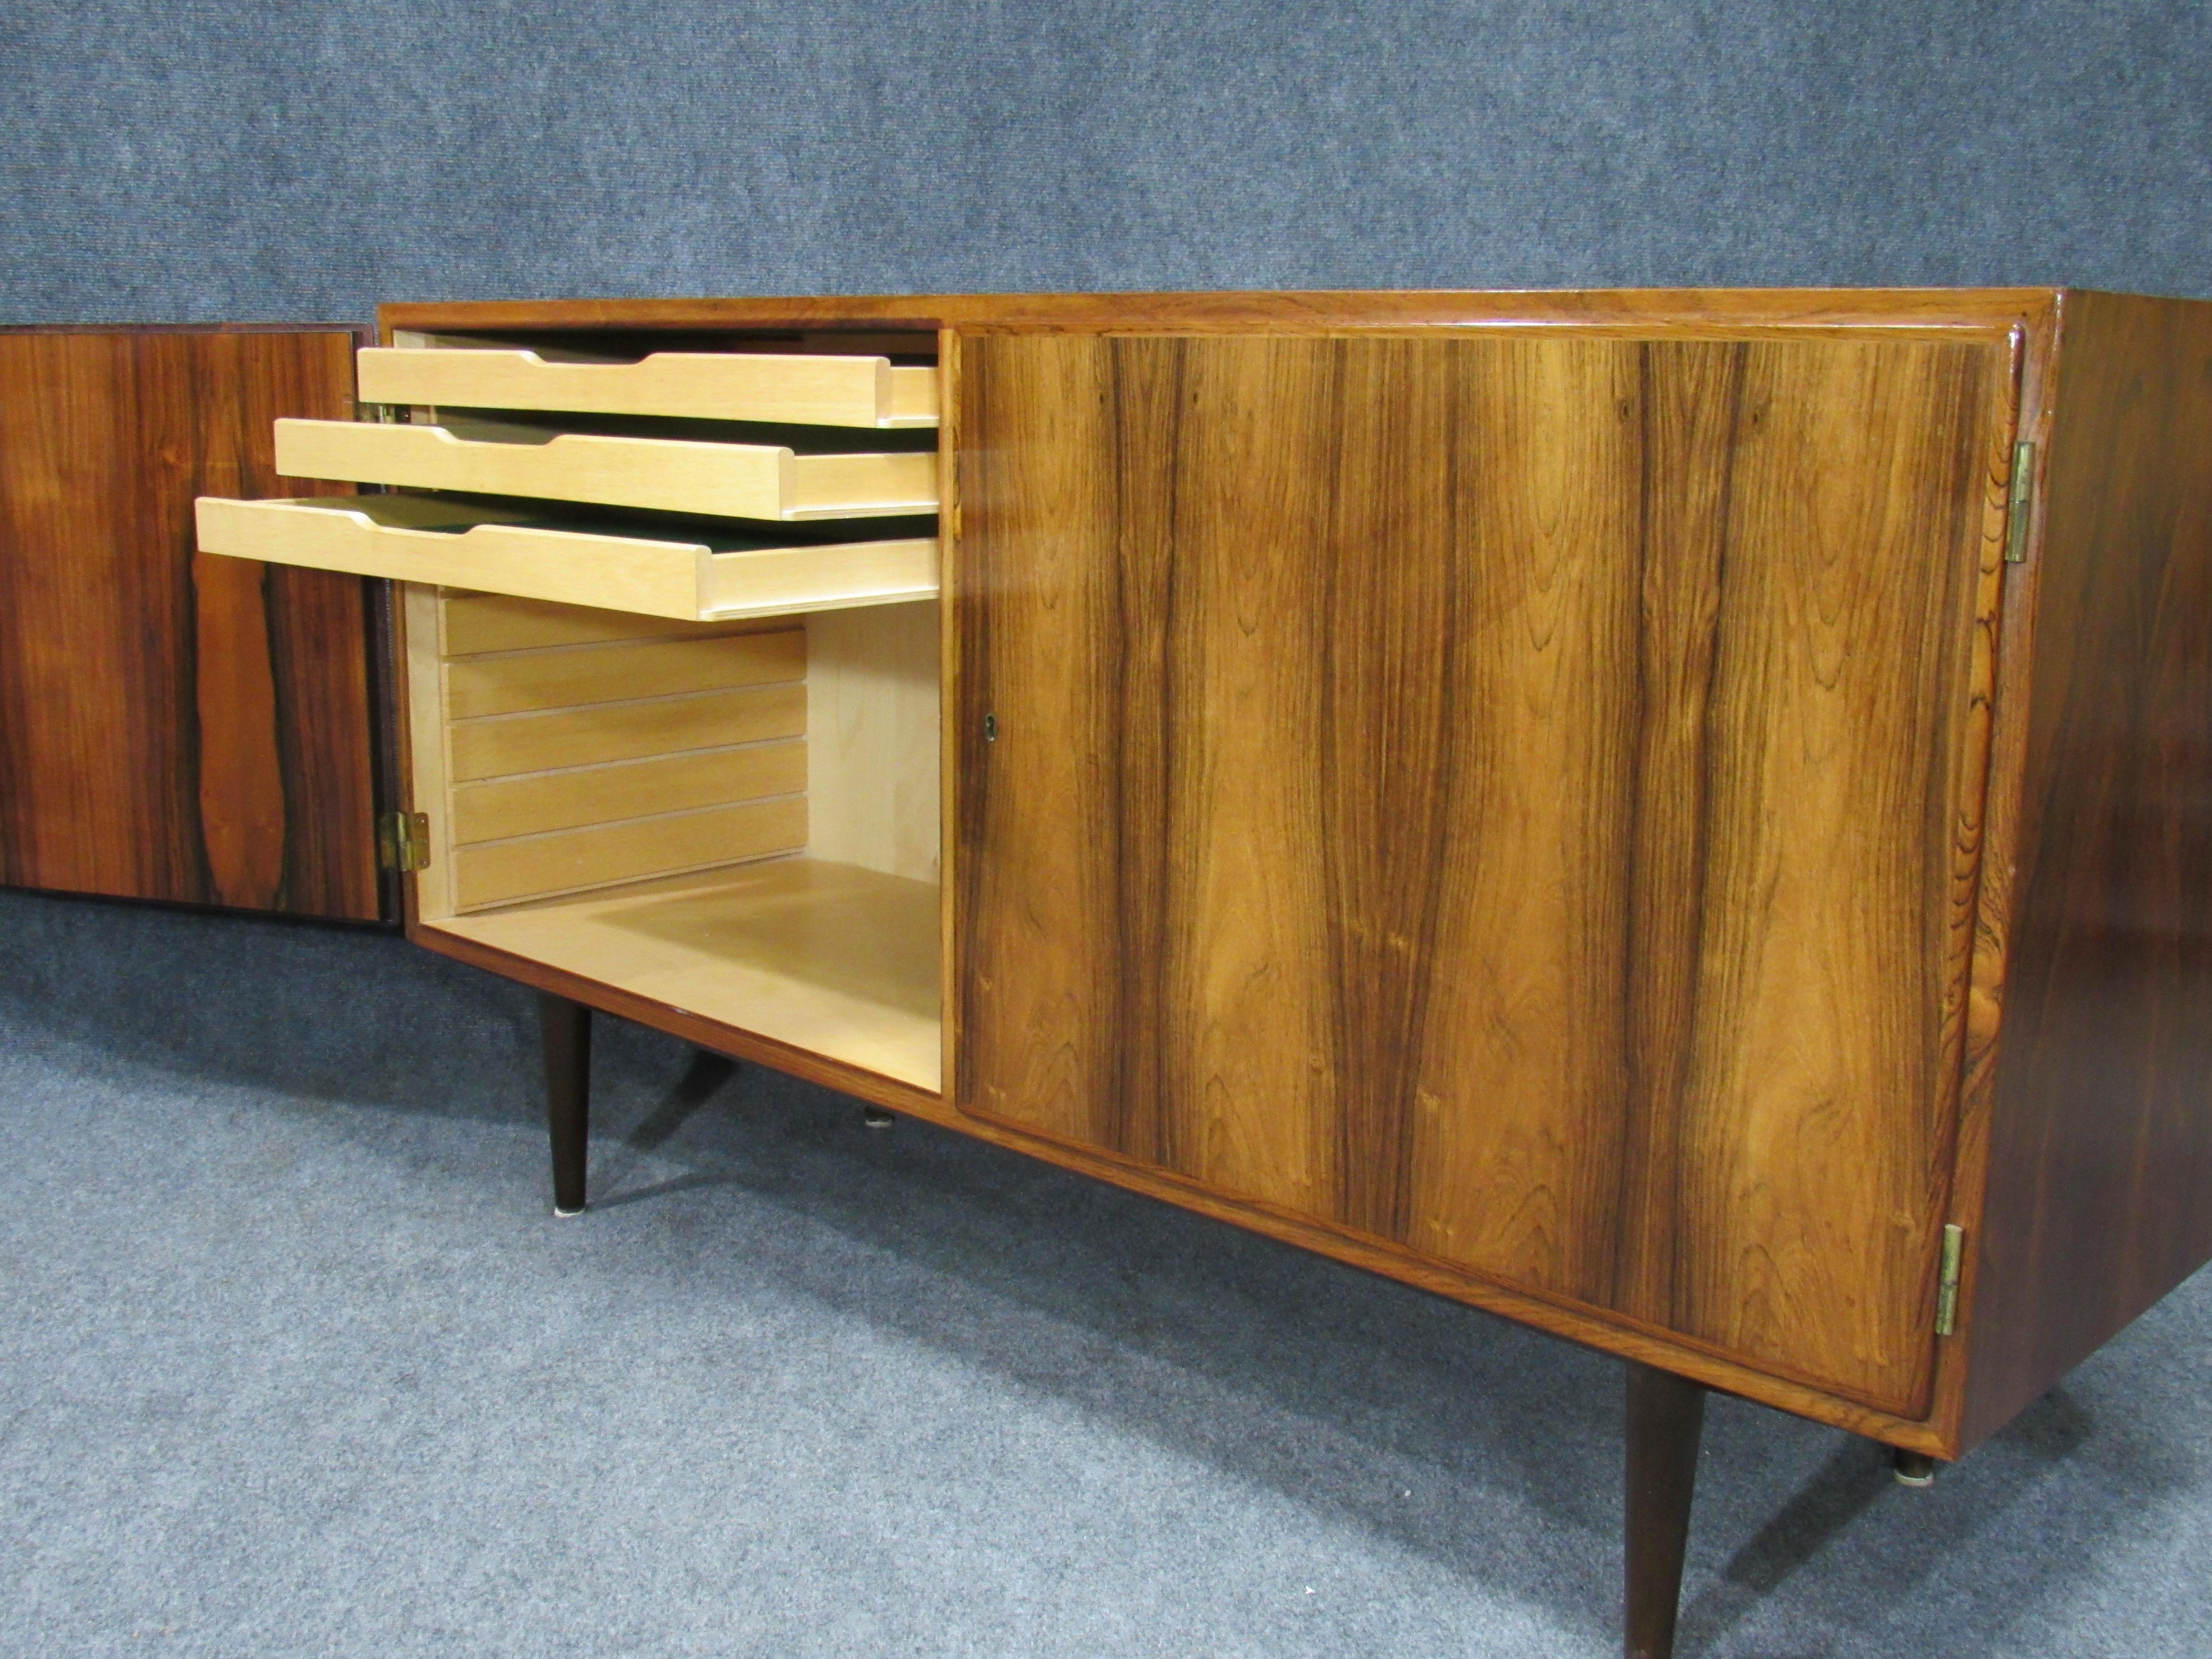 1960s Midcentury Danish Modern Rosewood Credenza Sideboard by Poul Hundevad 5